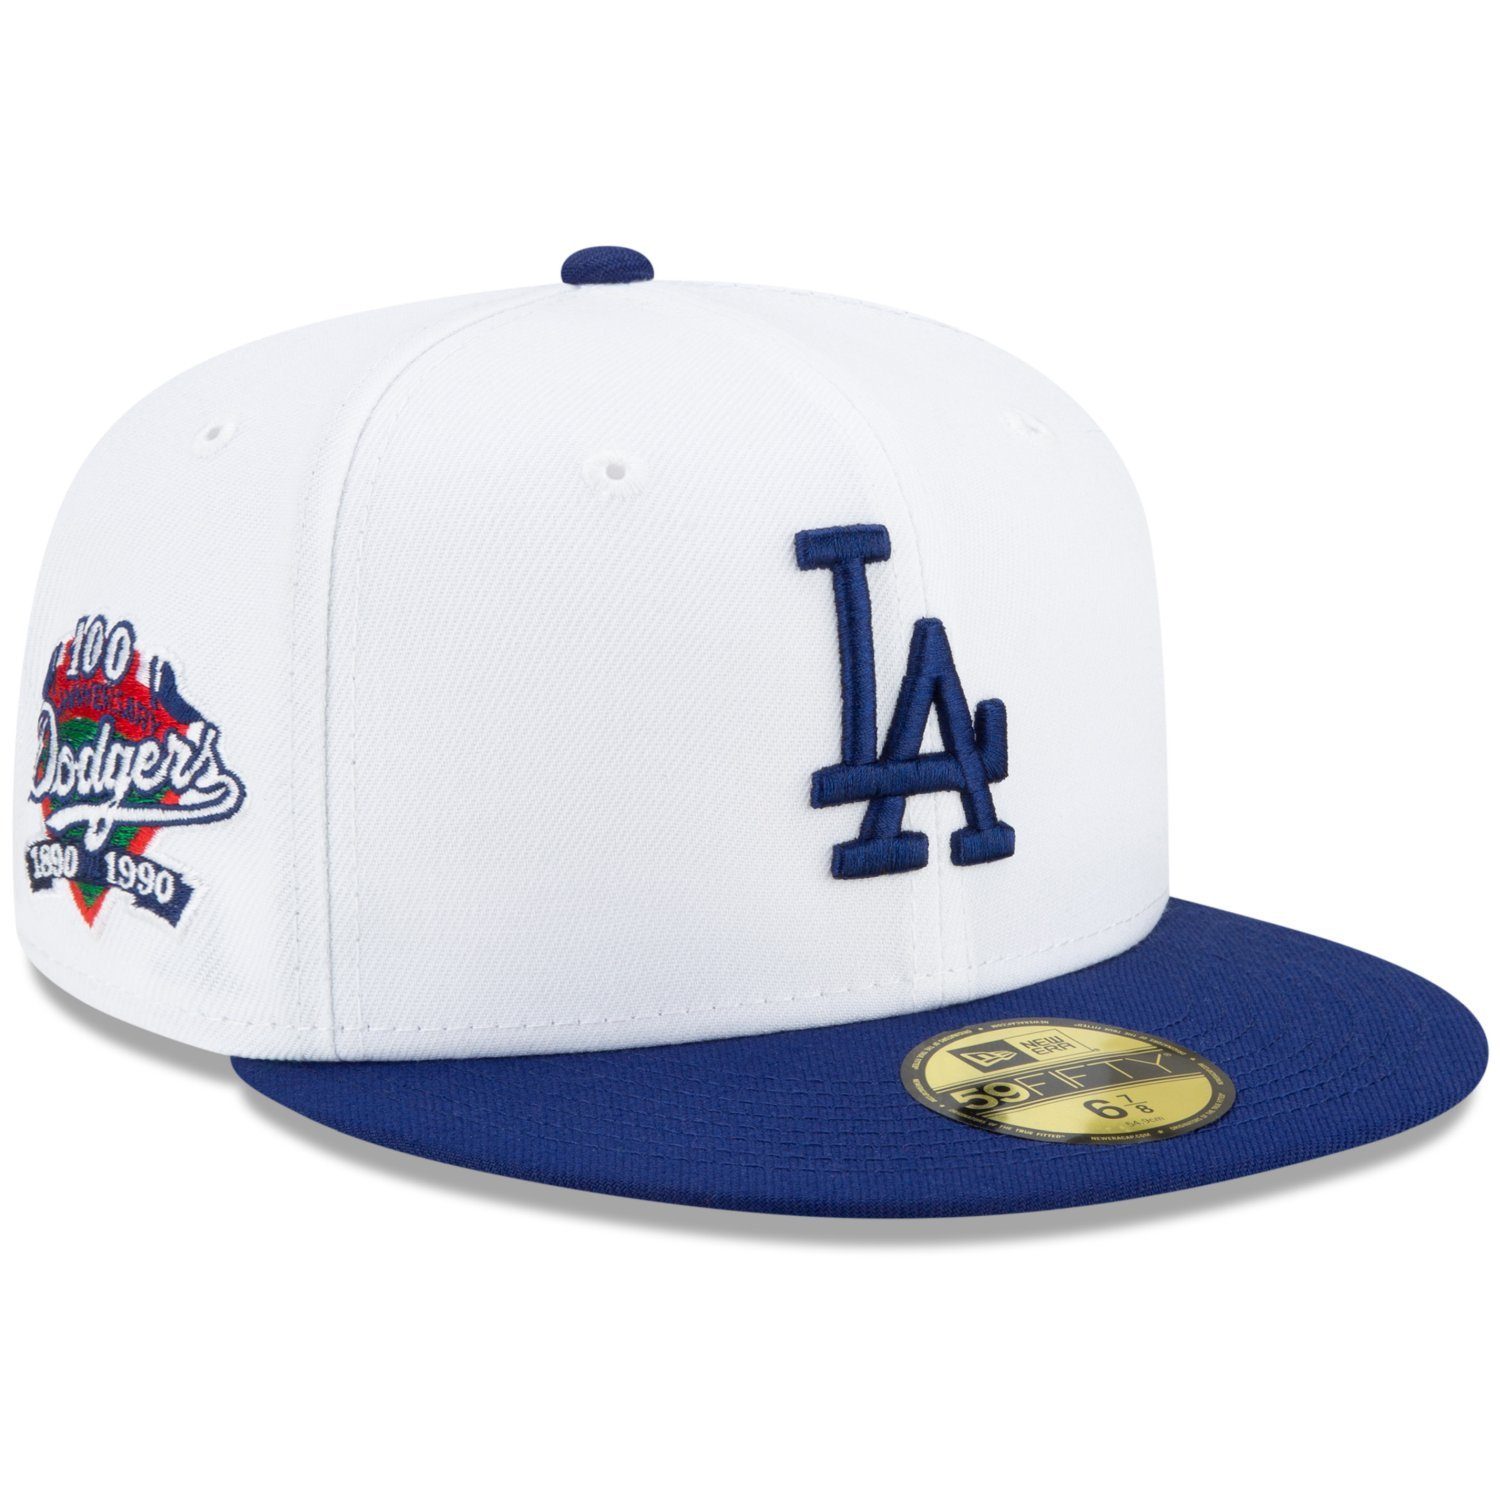 New ANNIVERSARY LA Era Fitted 100th 59Fifty Dodgers Cap